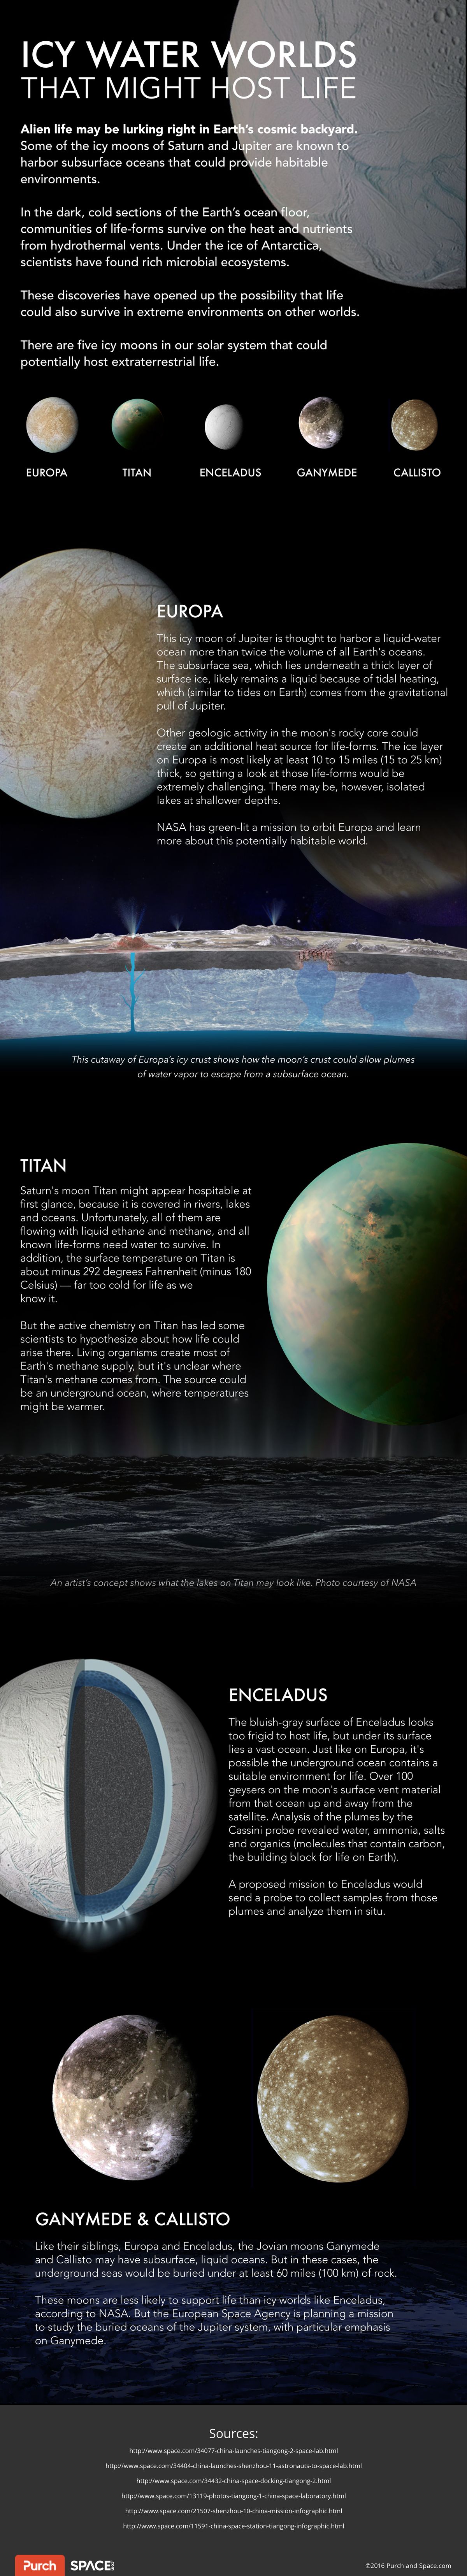 Icy Water Worlds That Might Host Life